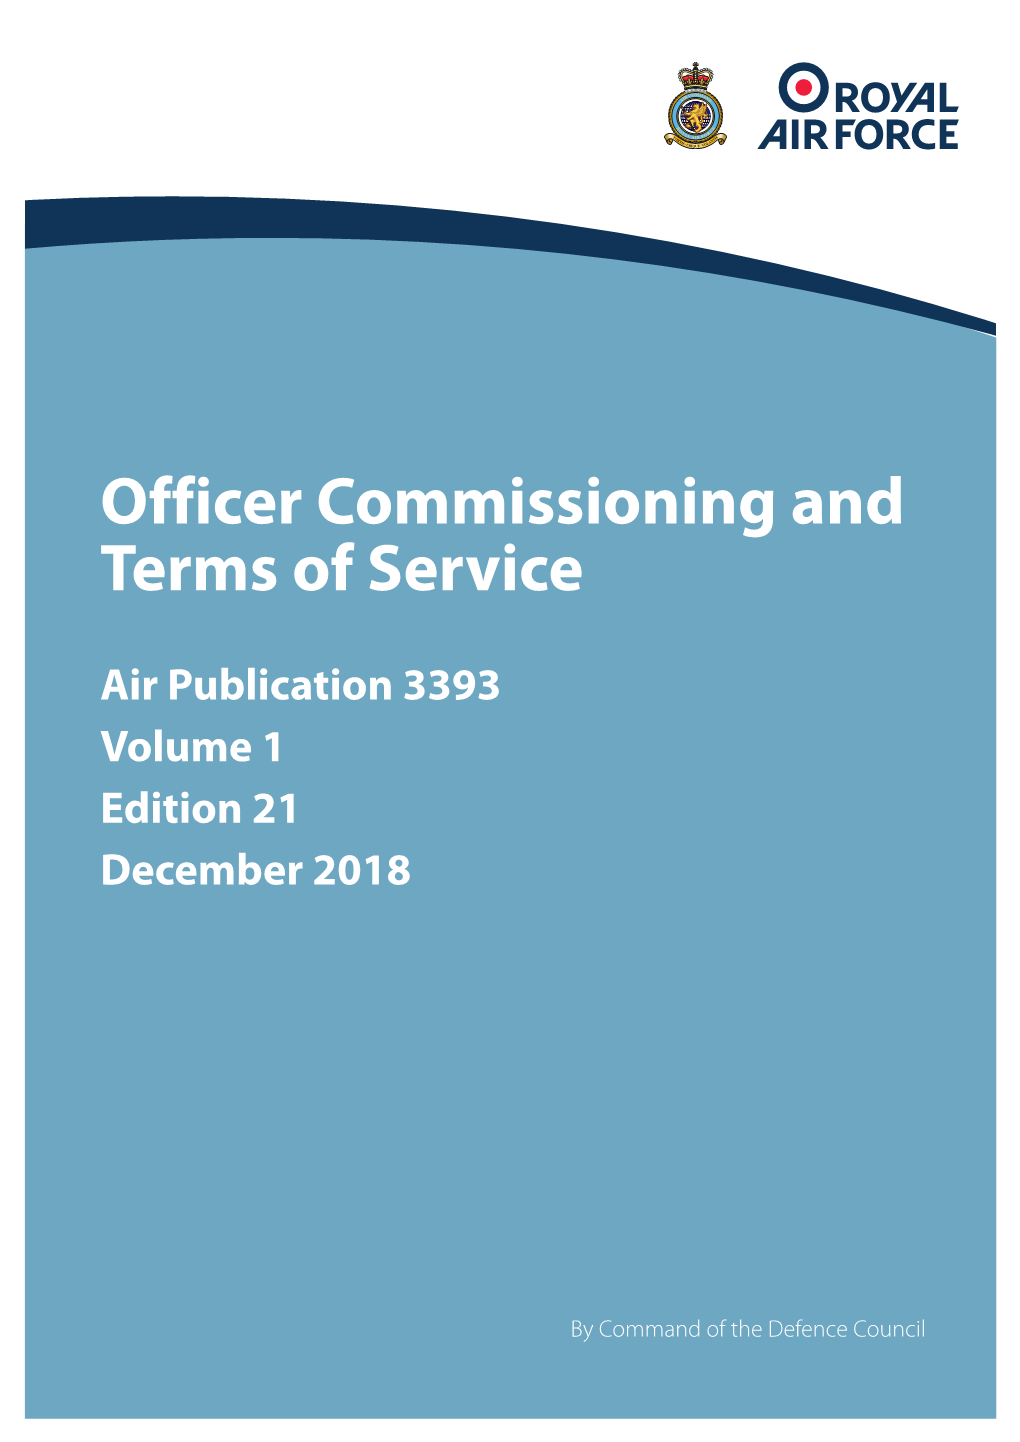 Officer Commissioning and Terms of Service